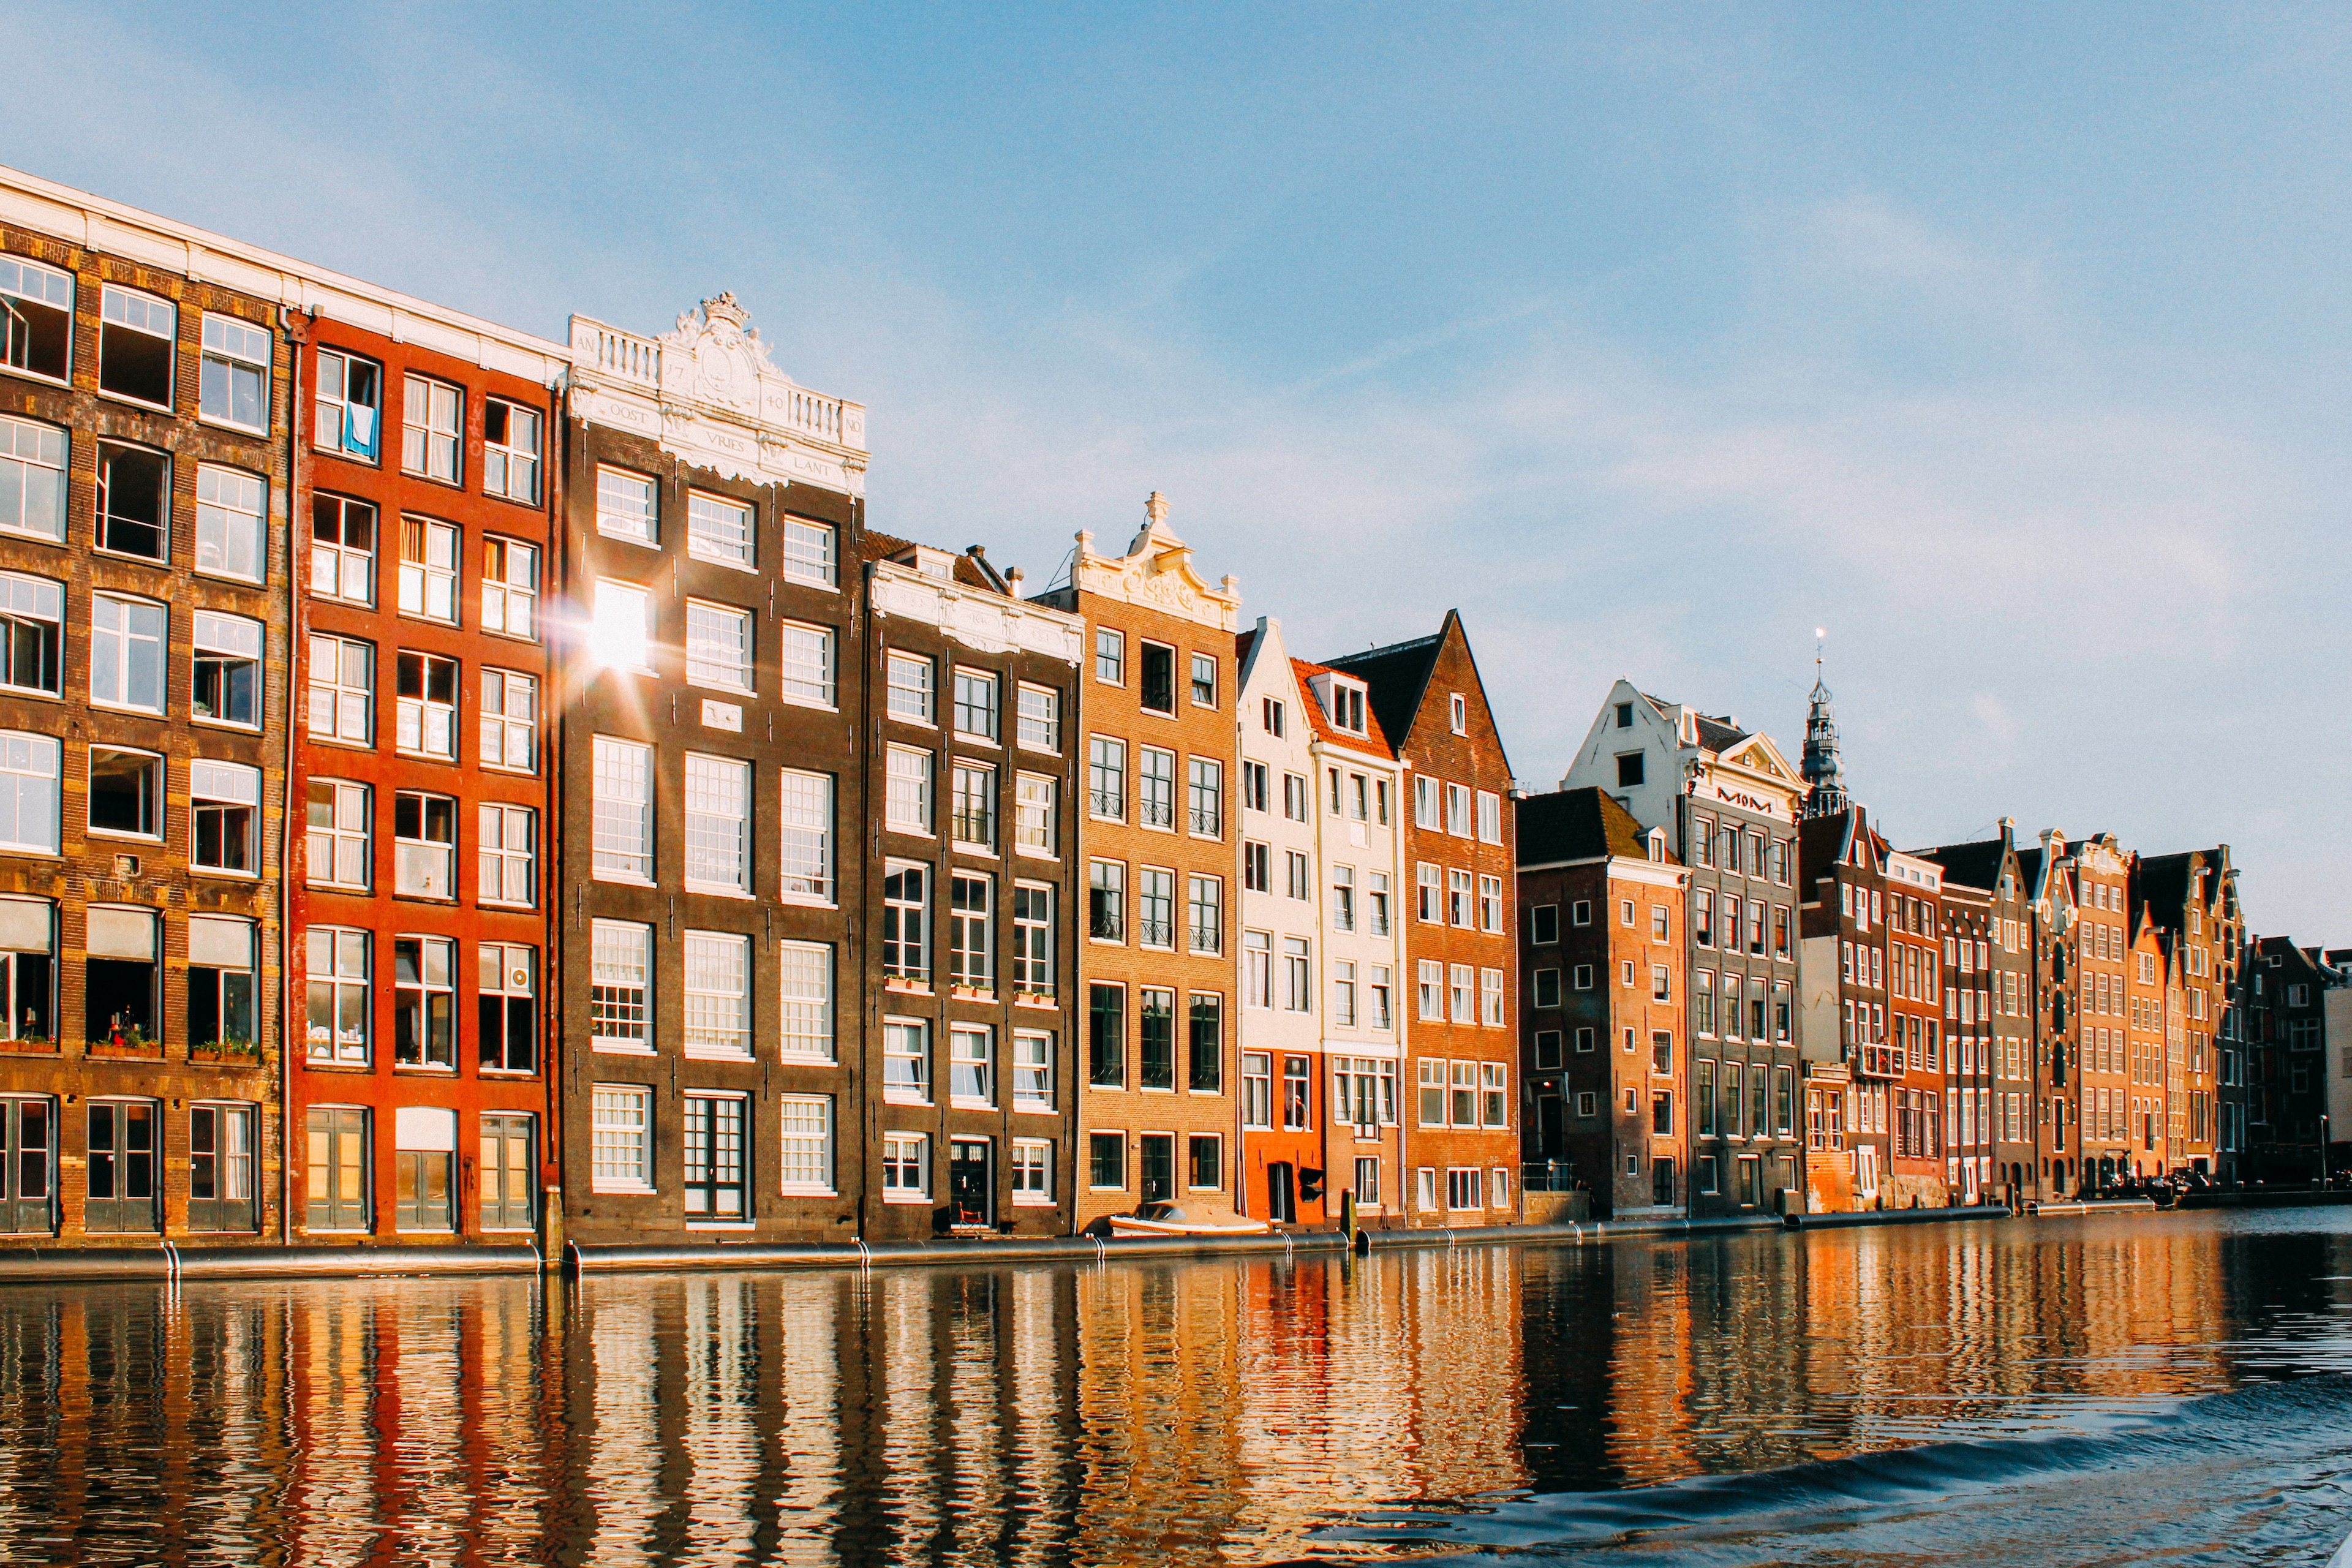 Stay in The Best Hotels in Amsterdam